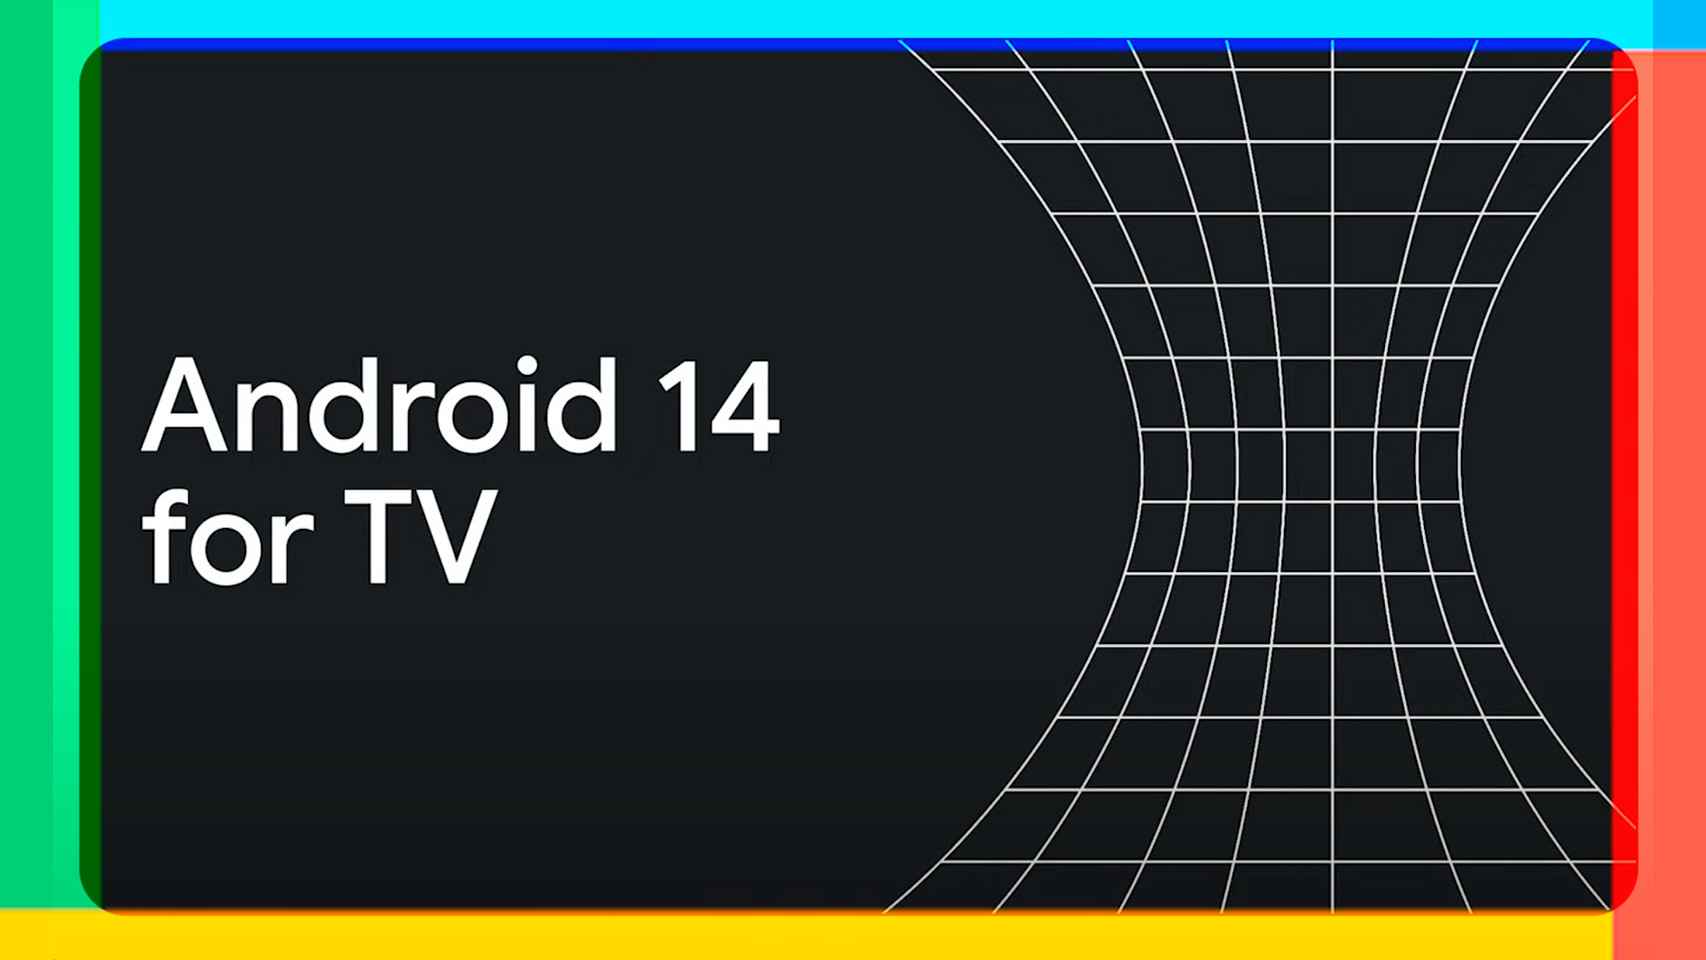 Android 14 for TV